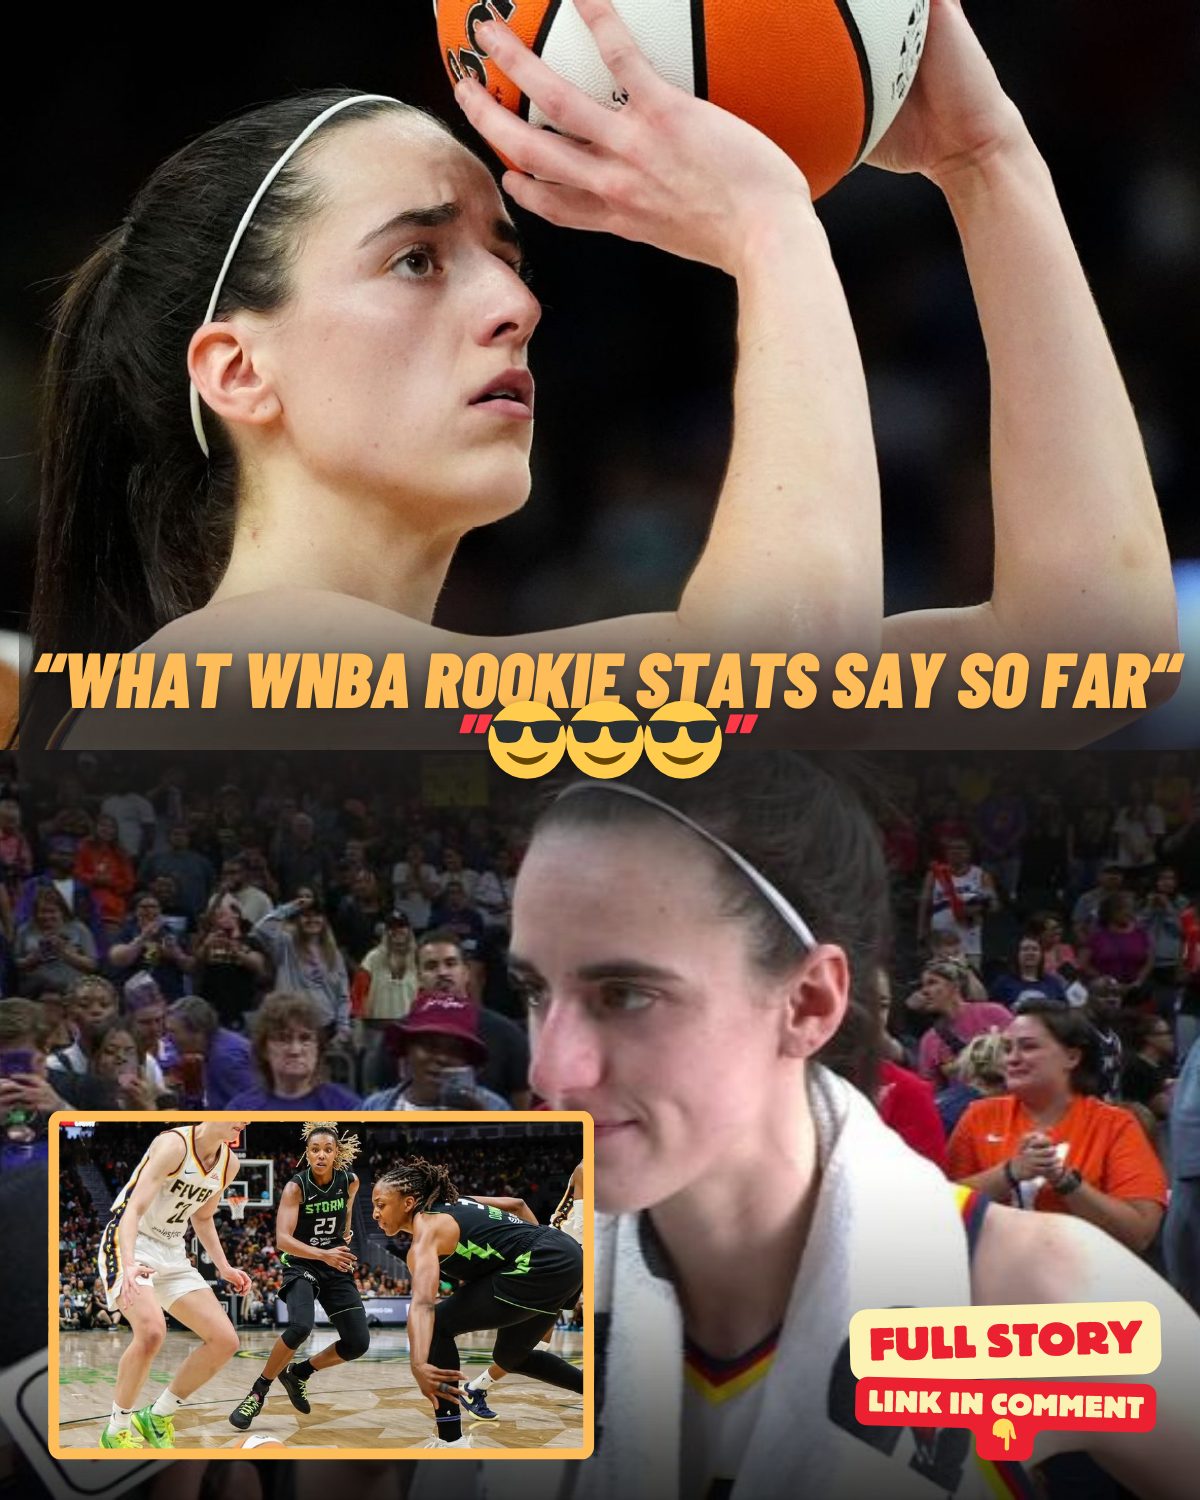 Cover Image for Caitlin Clark midseason: What WNBA rookie stats say so far